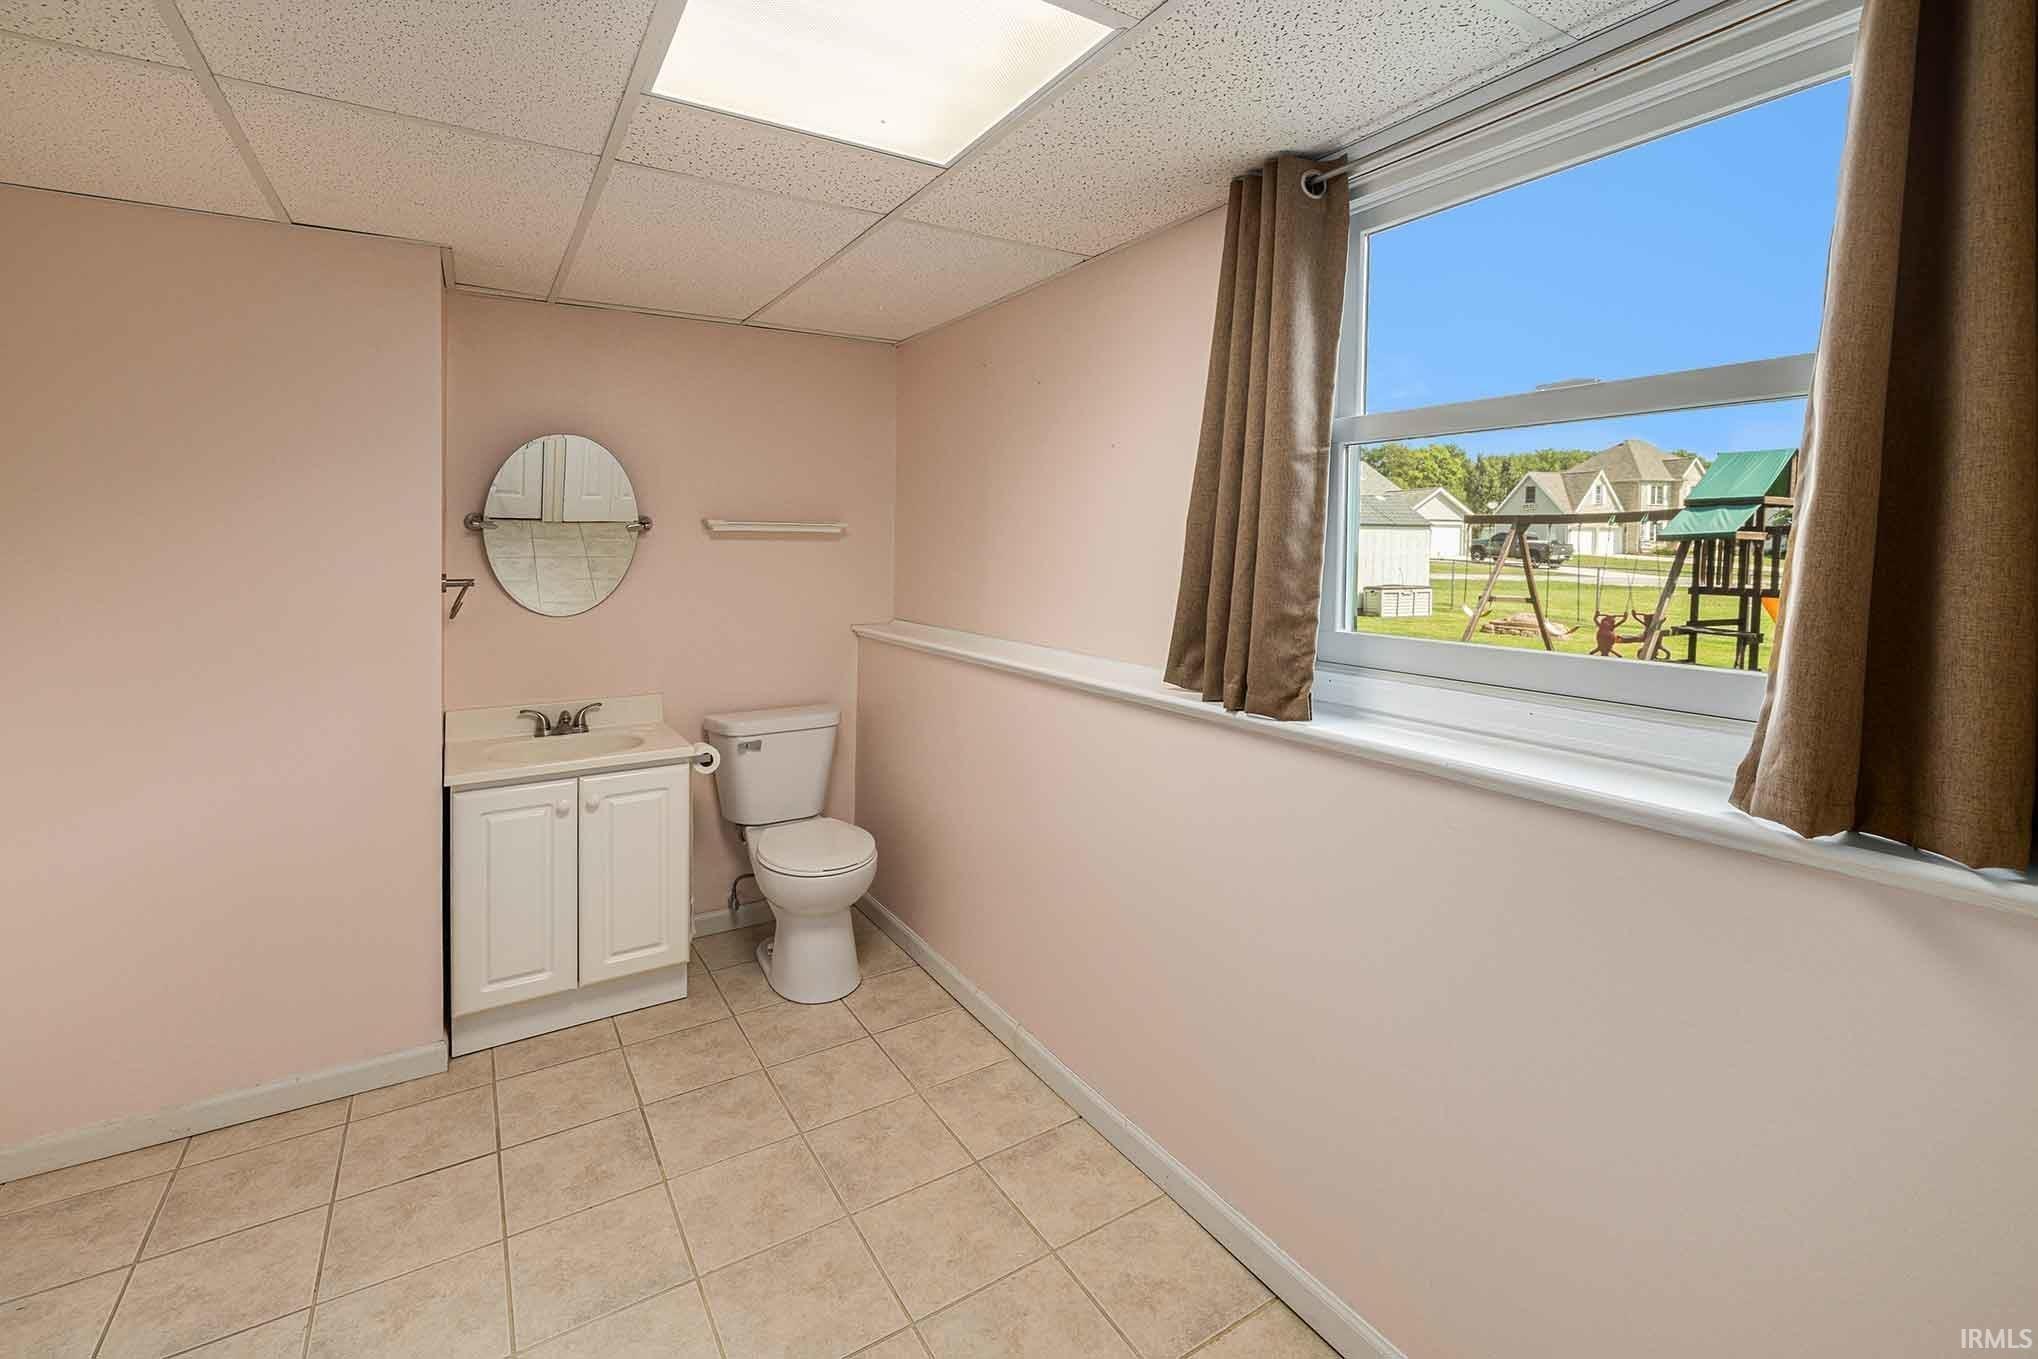 Includes Laundry Area in Lower Level.